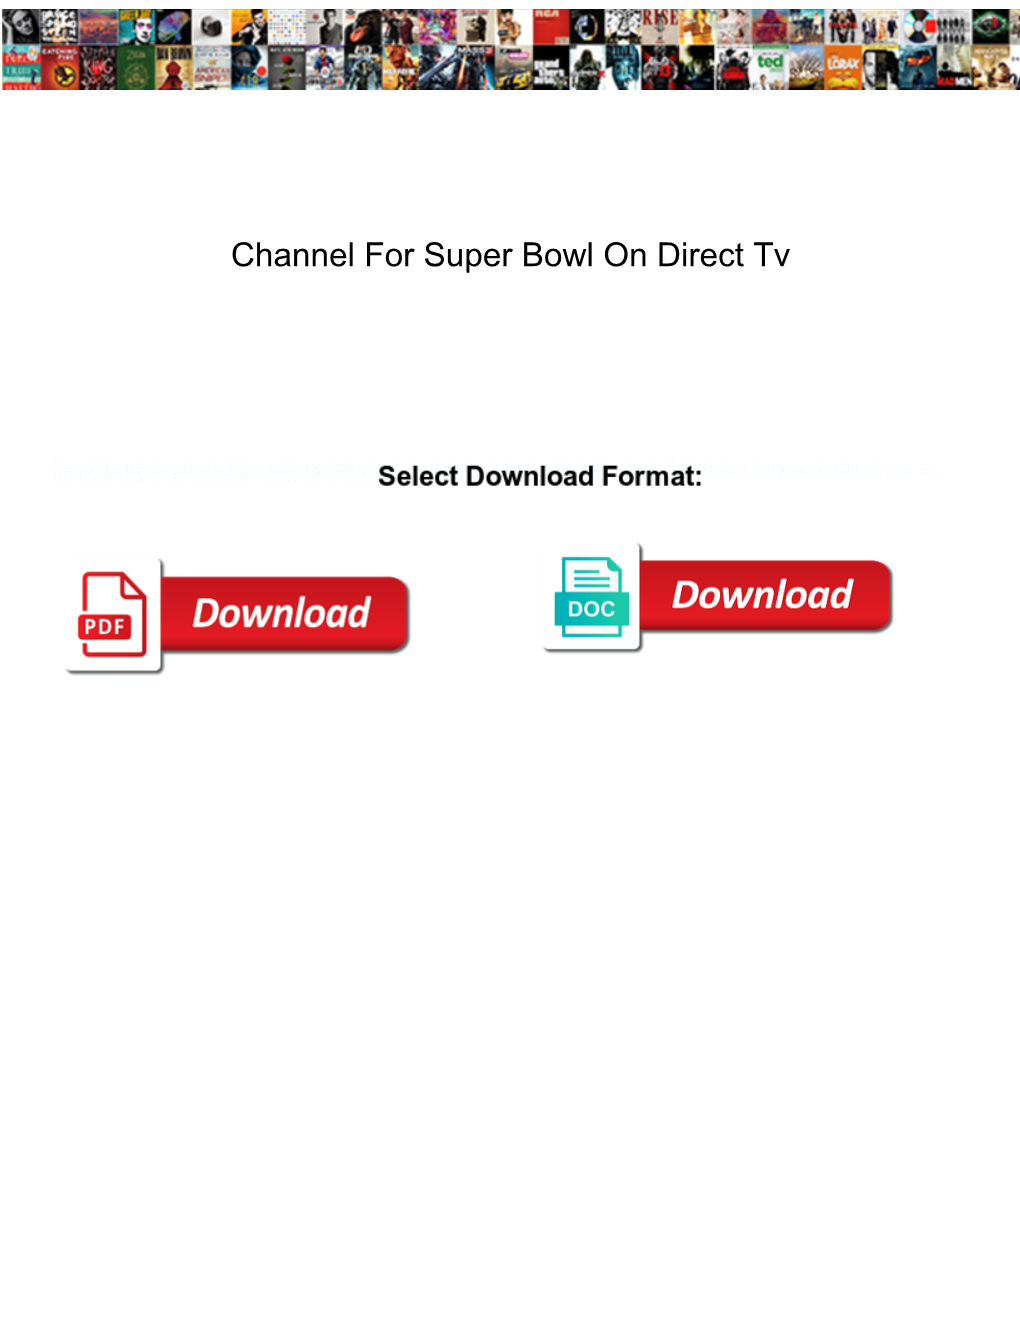 Channel for Super Bowl on Direct Tv